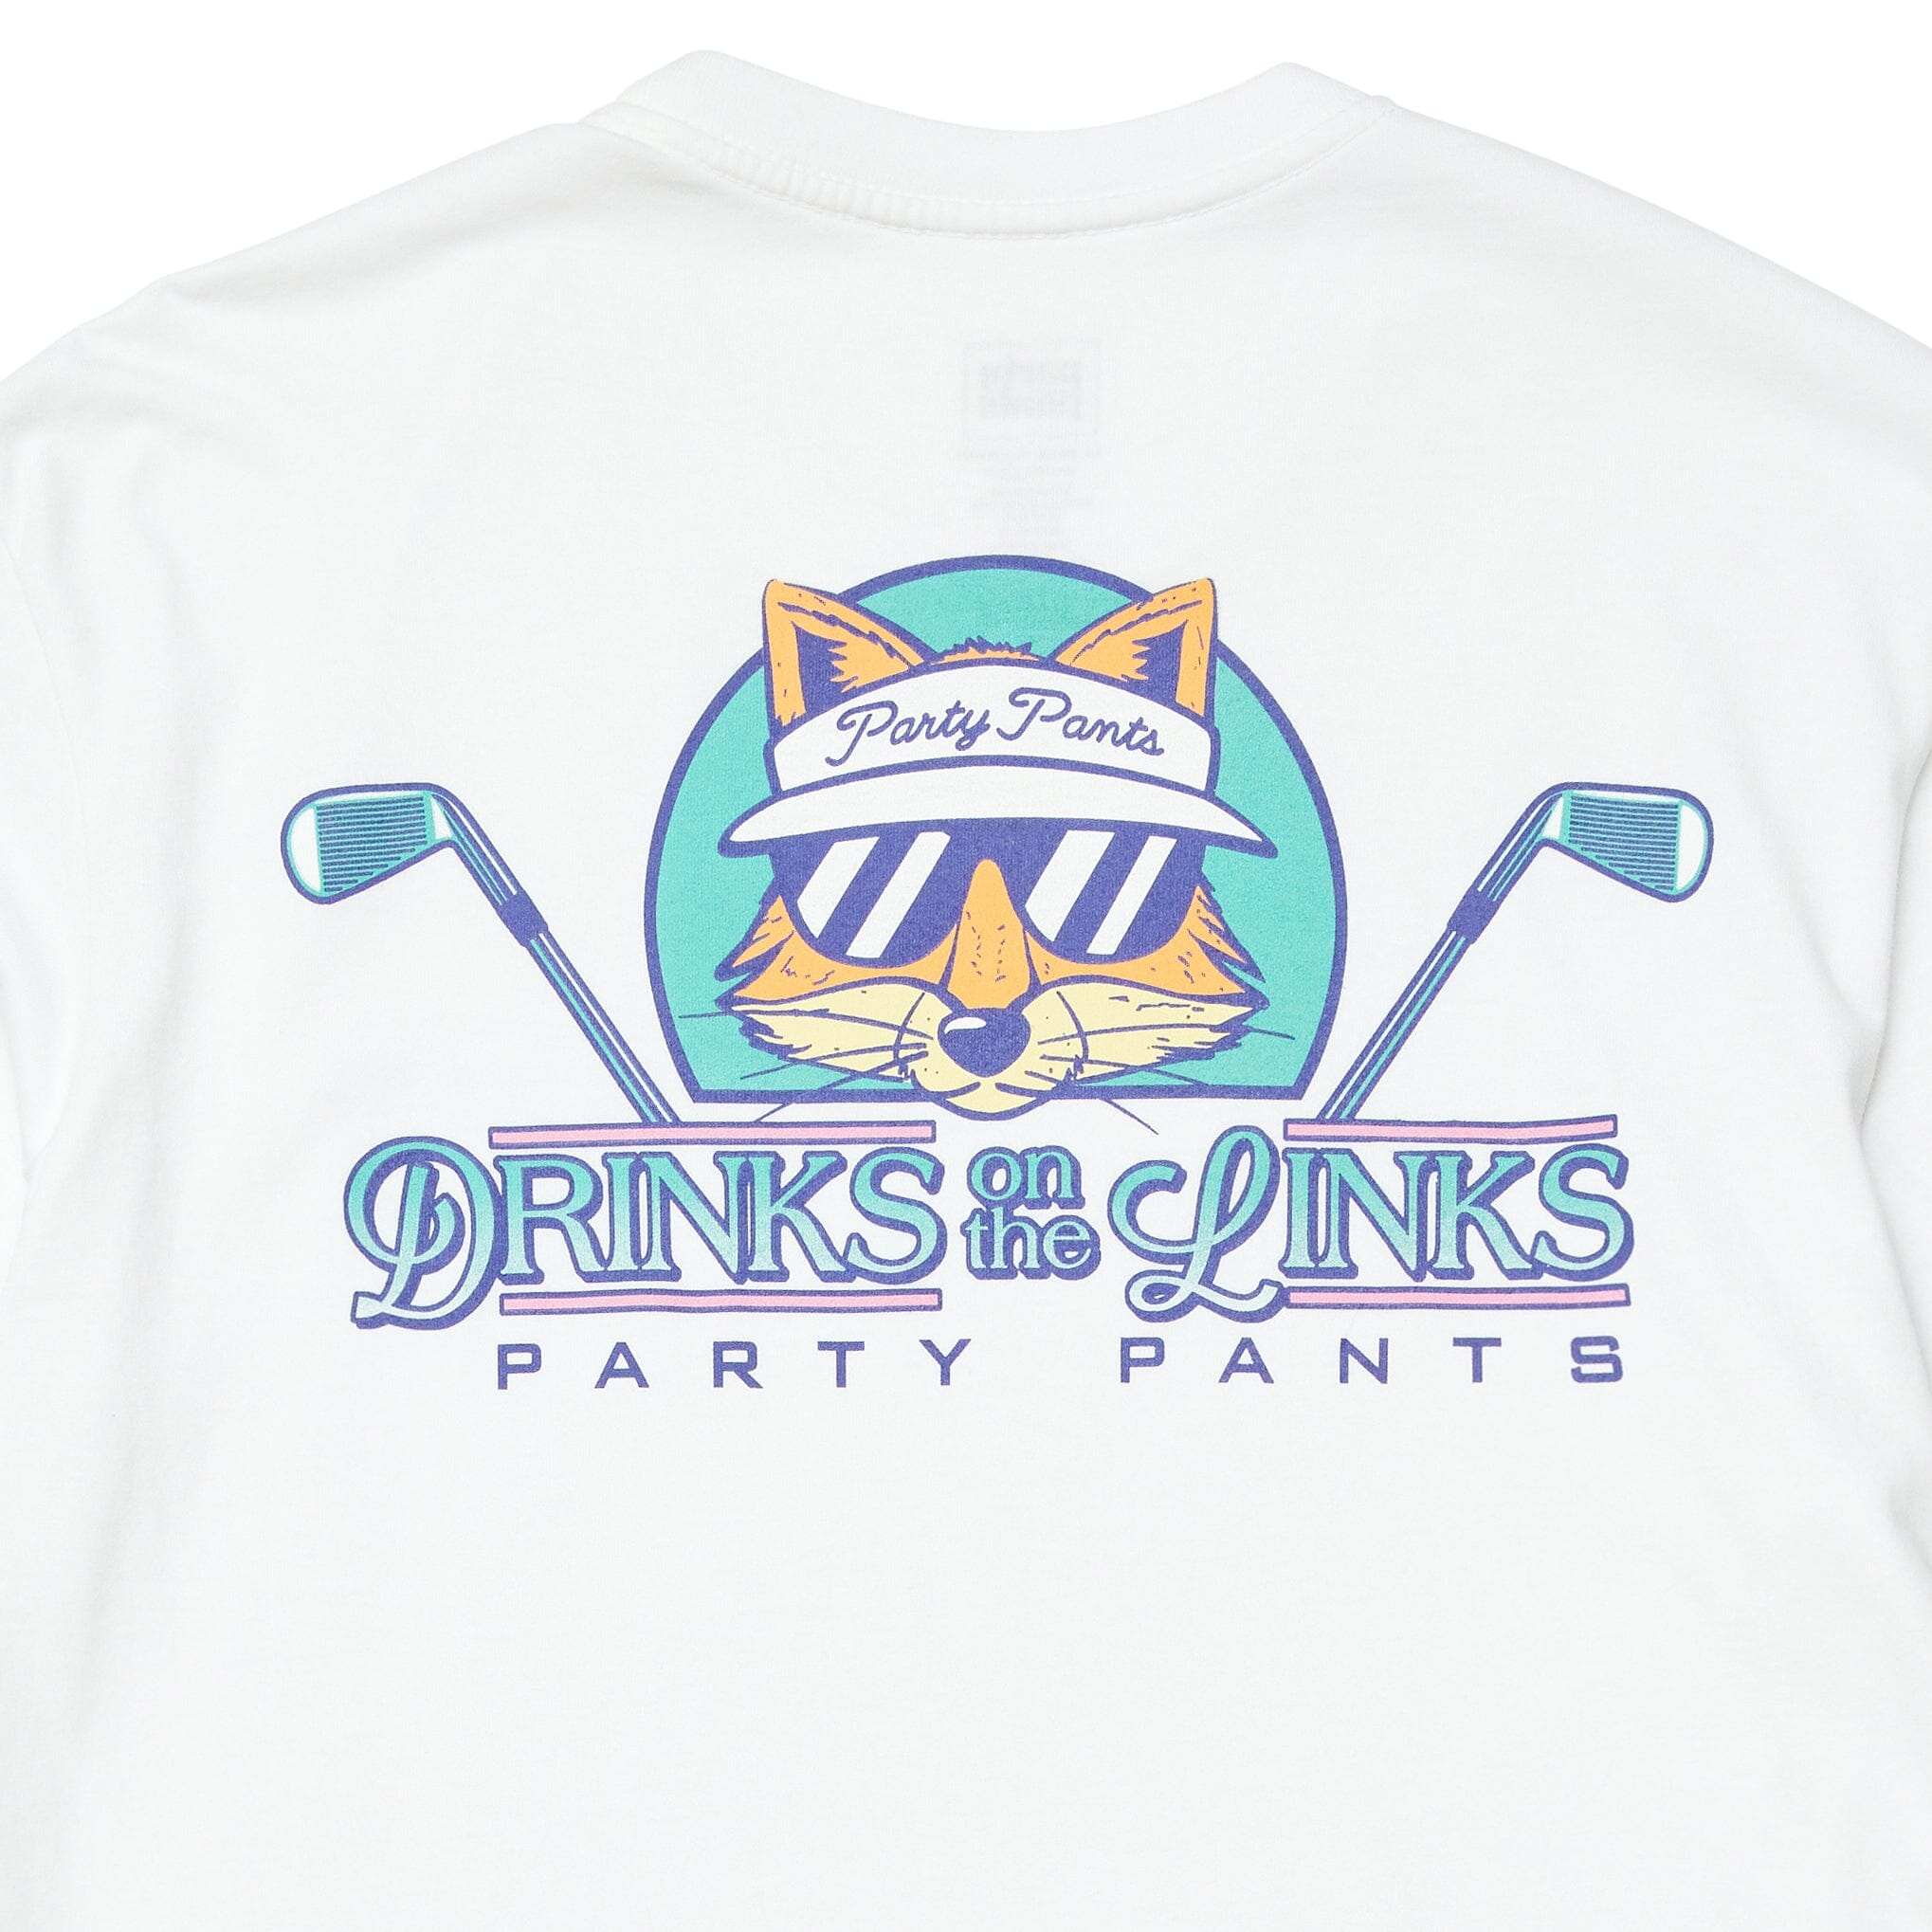 DRINKS ON THE LINKS T-SHIRT - WHITE TEE PARTY PANTS 